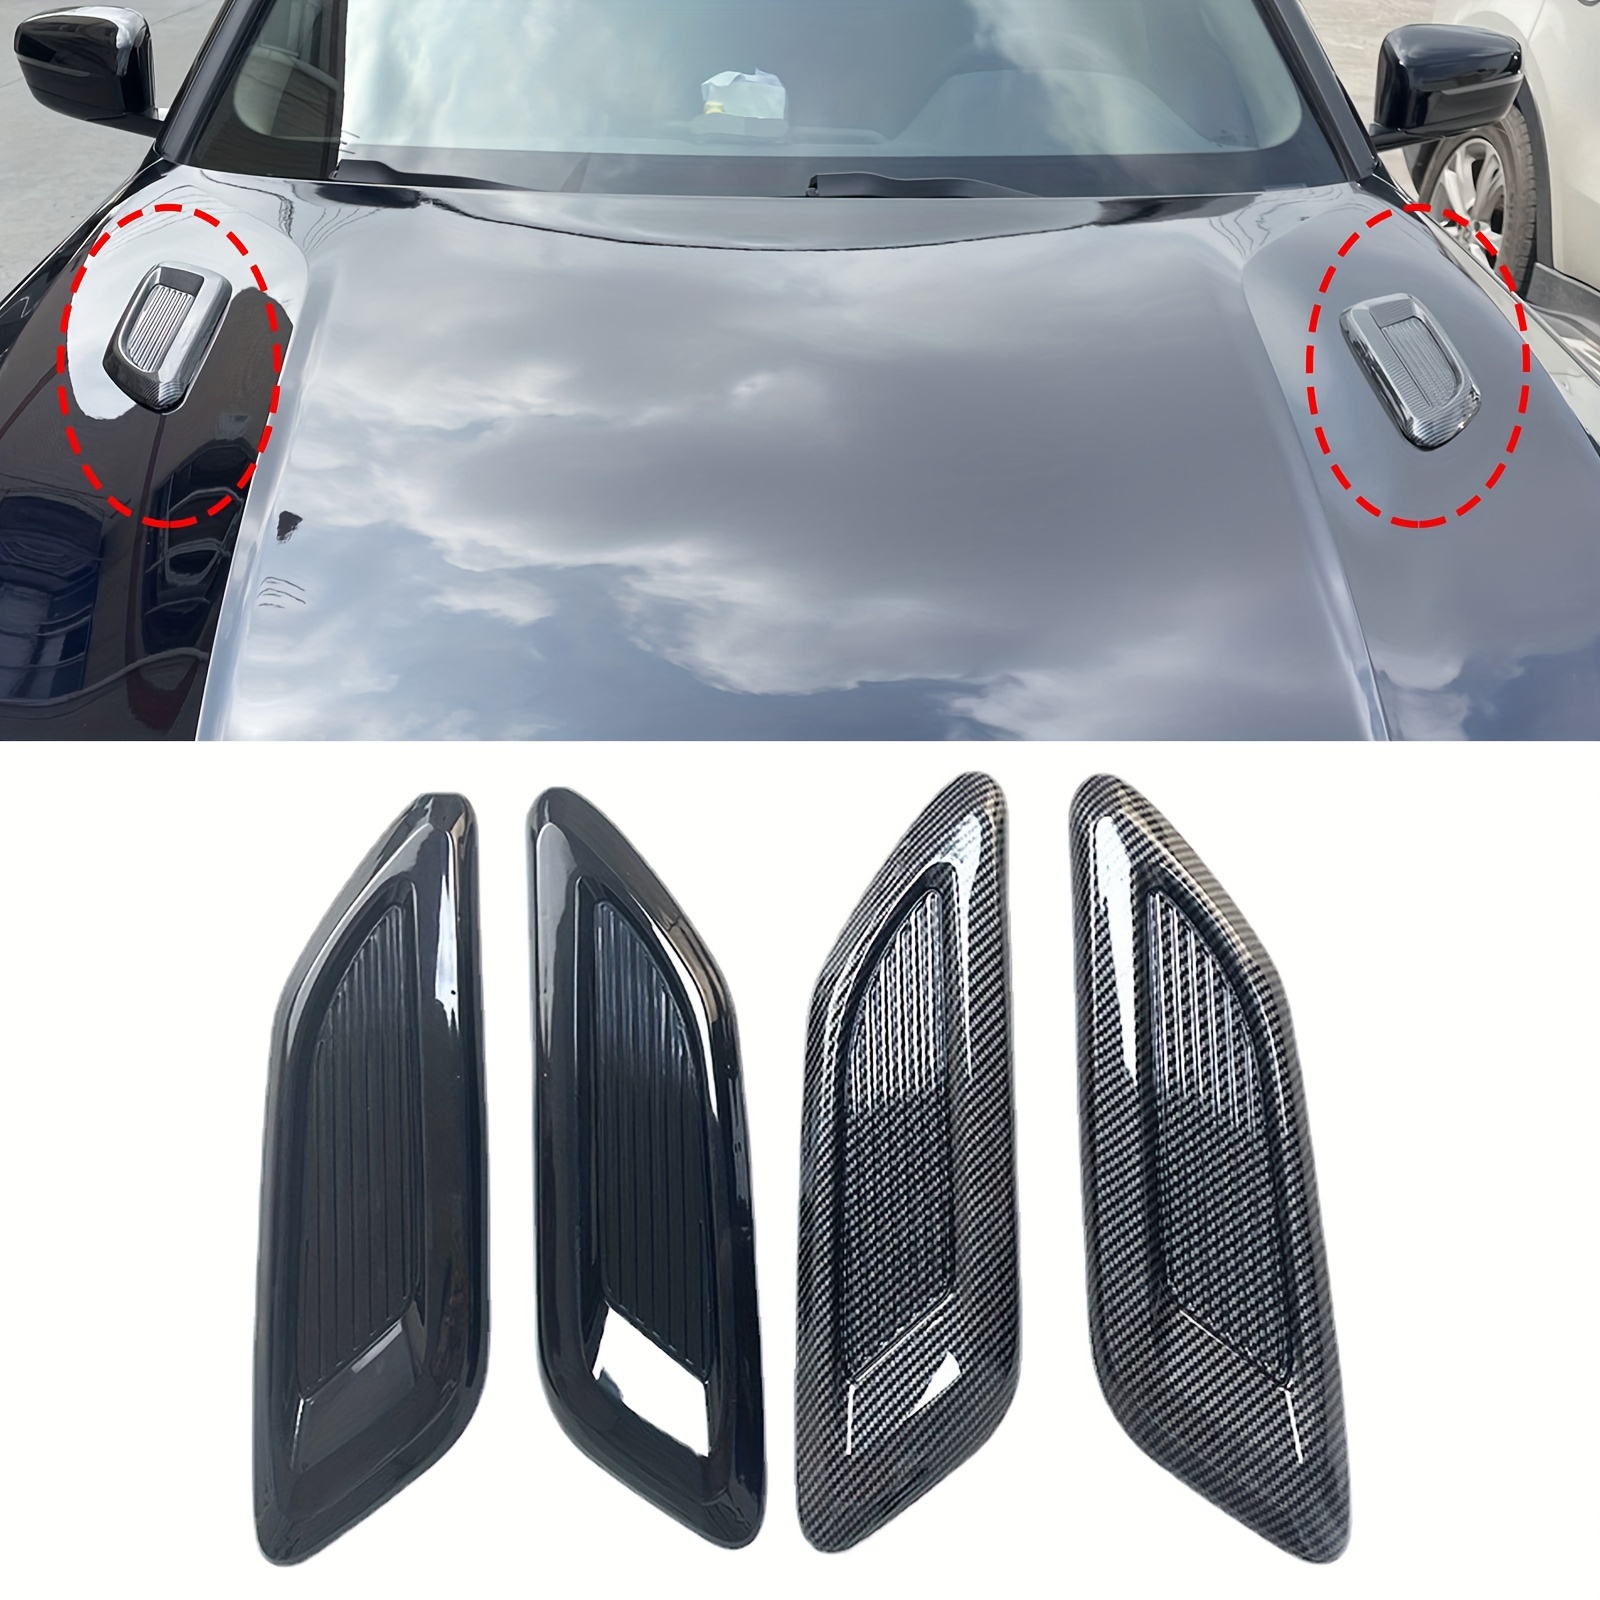 Black Side Air Intake Flow Vent Hood Modified Sticker Car Styling Decorative  Decoration For Exterior Drop Delivery Available From Dhpwbhsh, $17